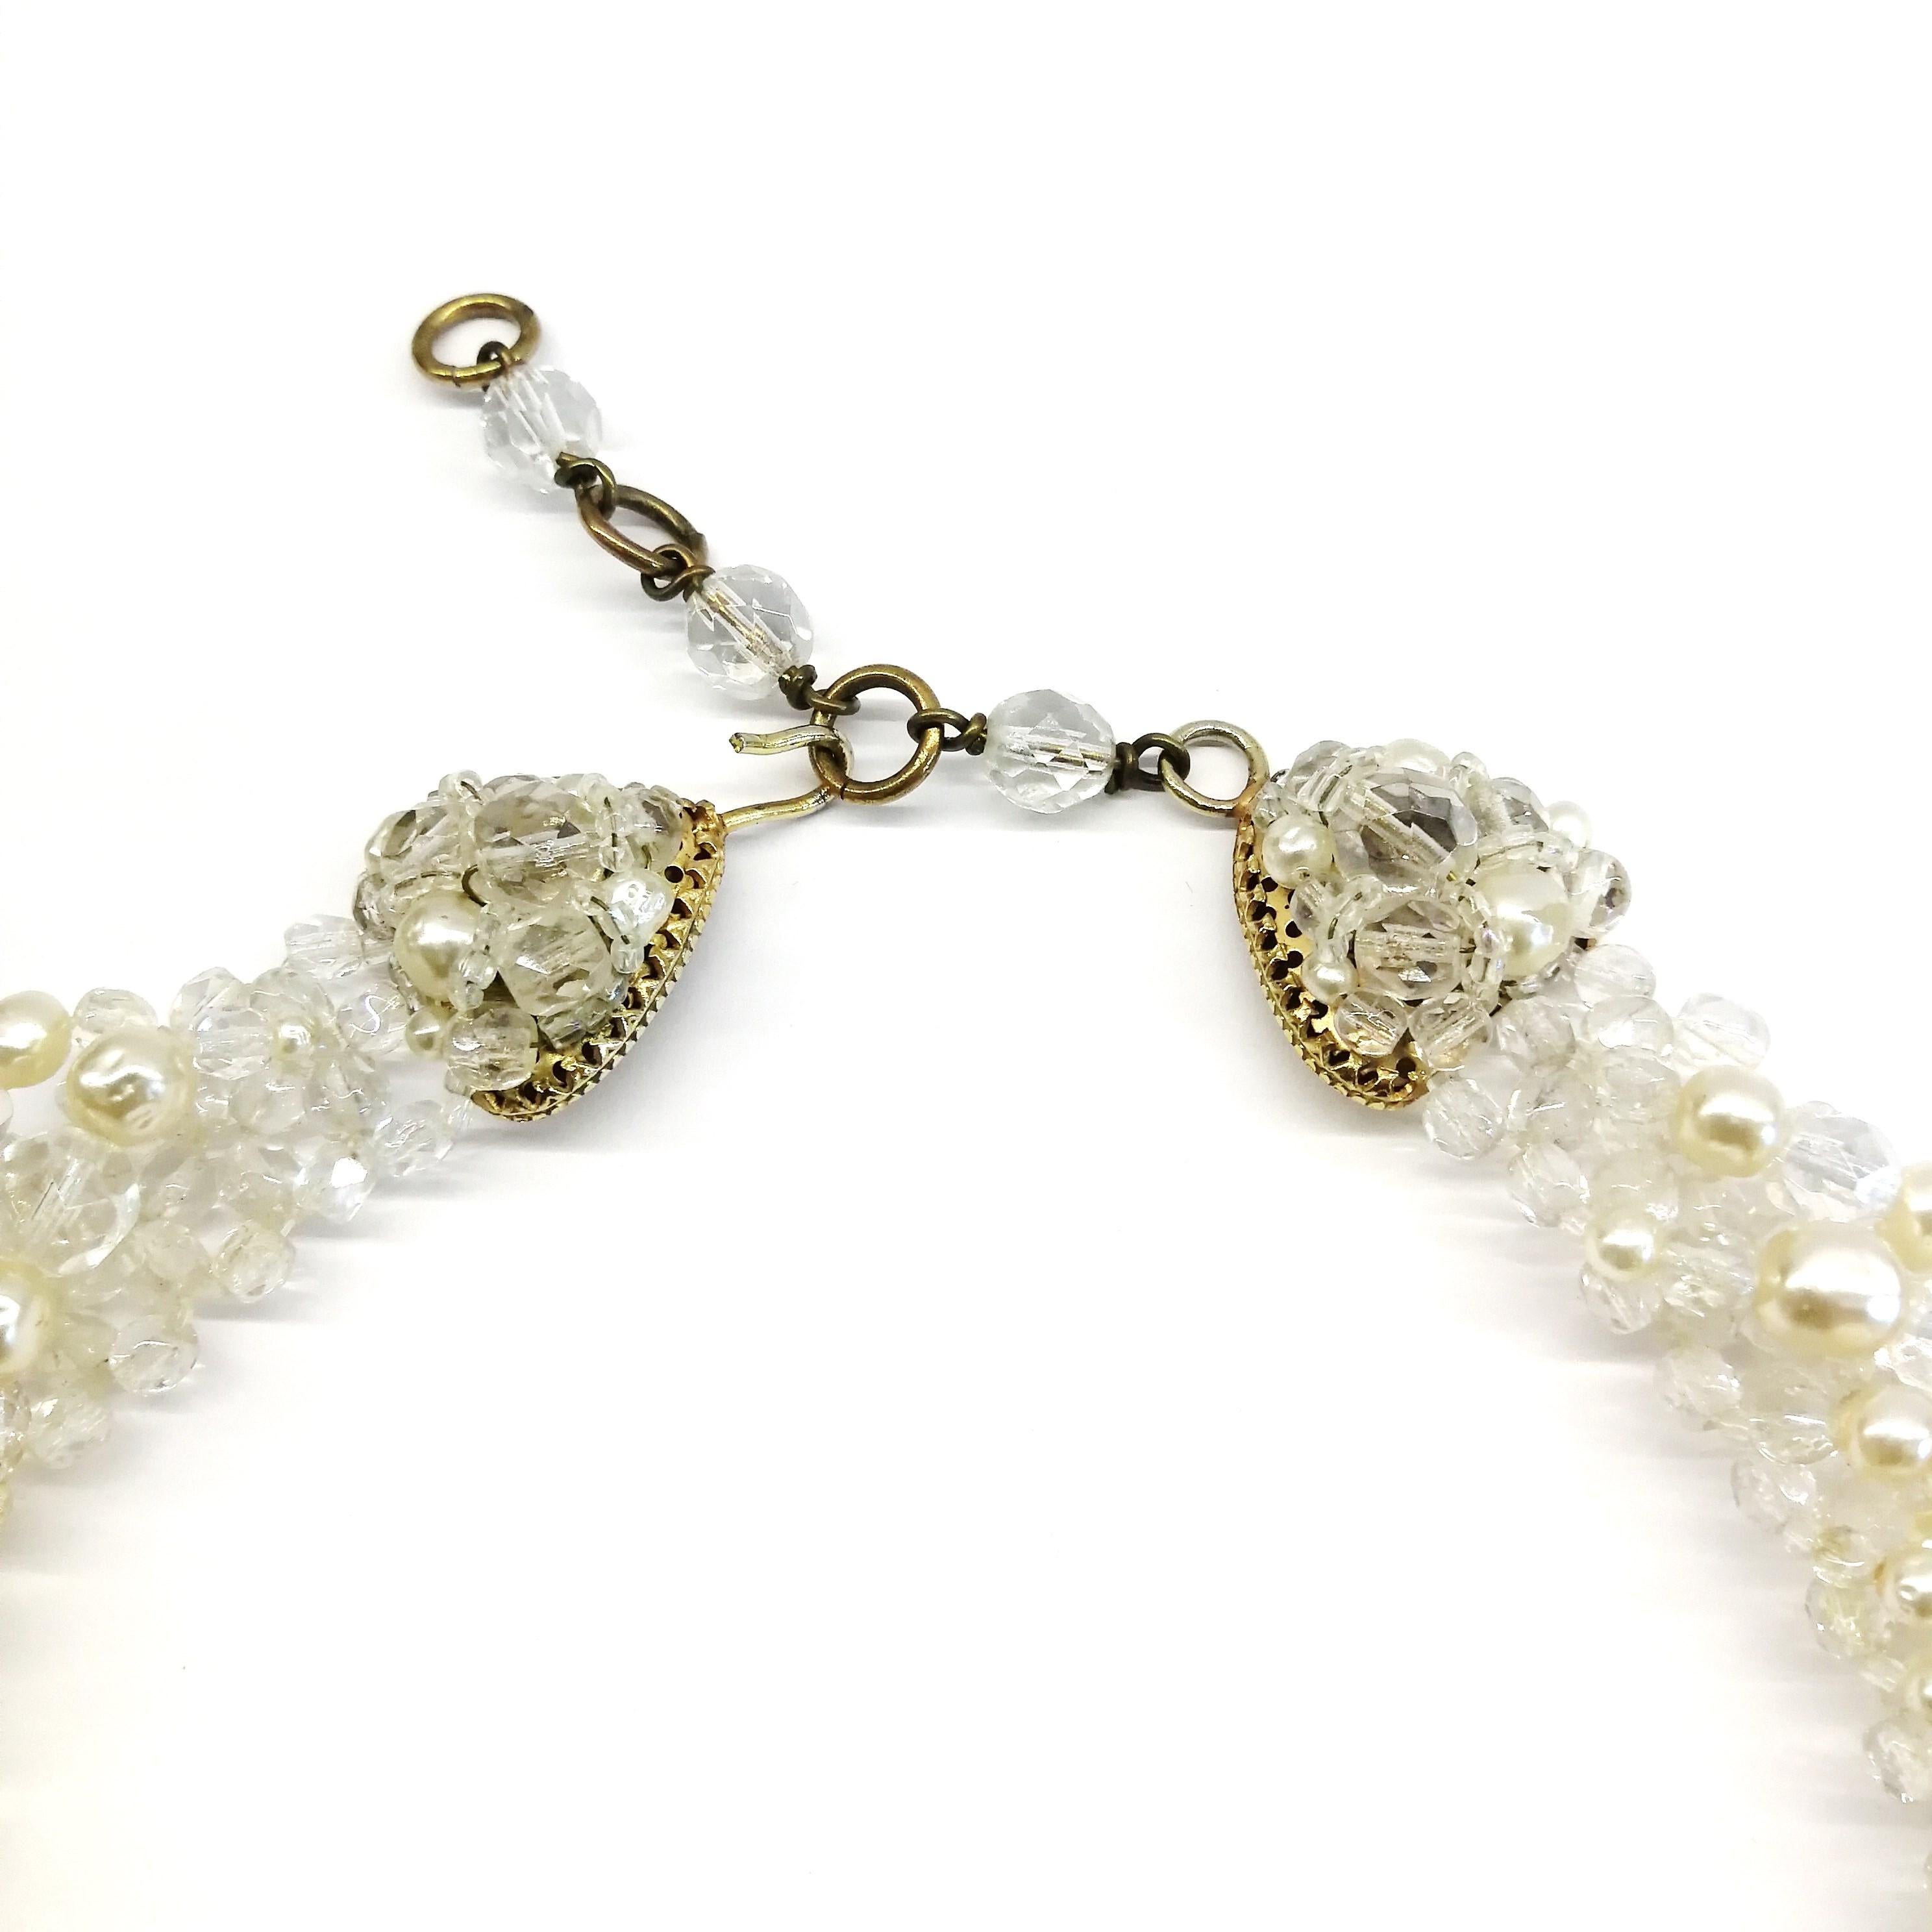 Baroque pearl and half crystal bead necklace and earrings, Coppola e Toppo, 1969 1